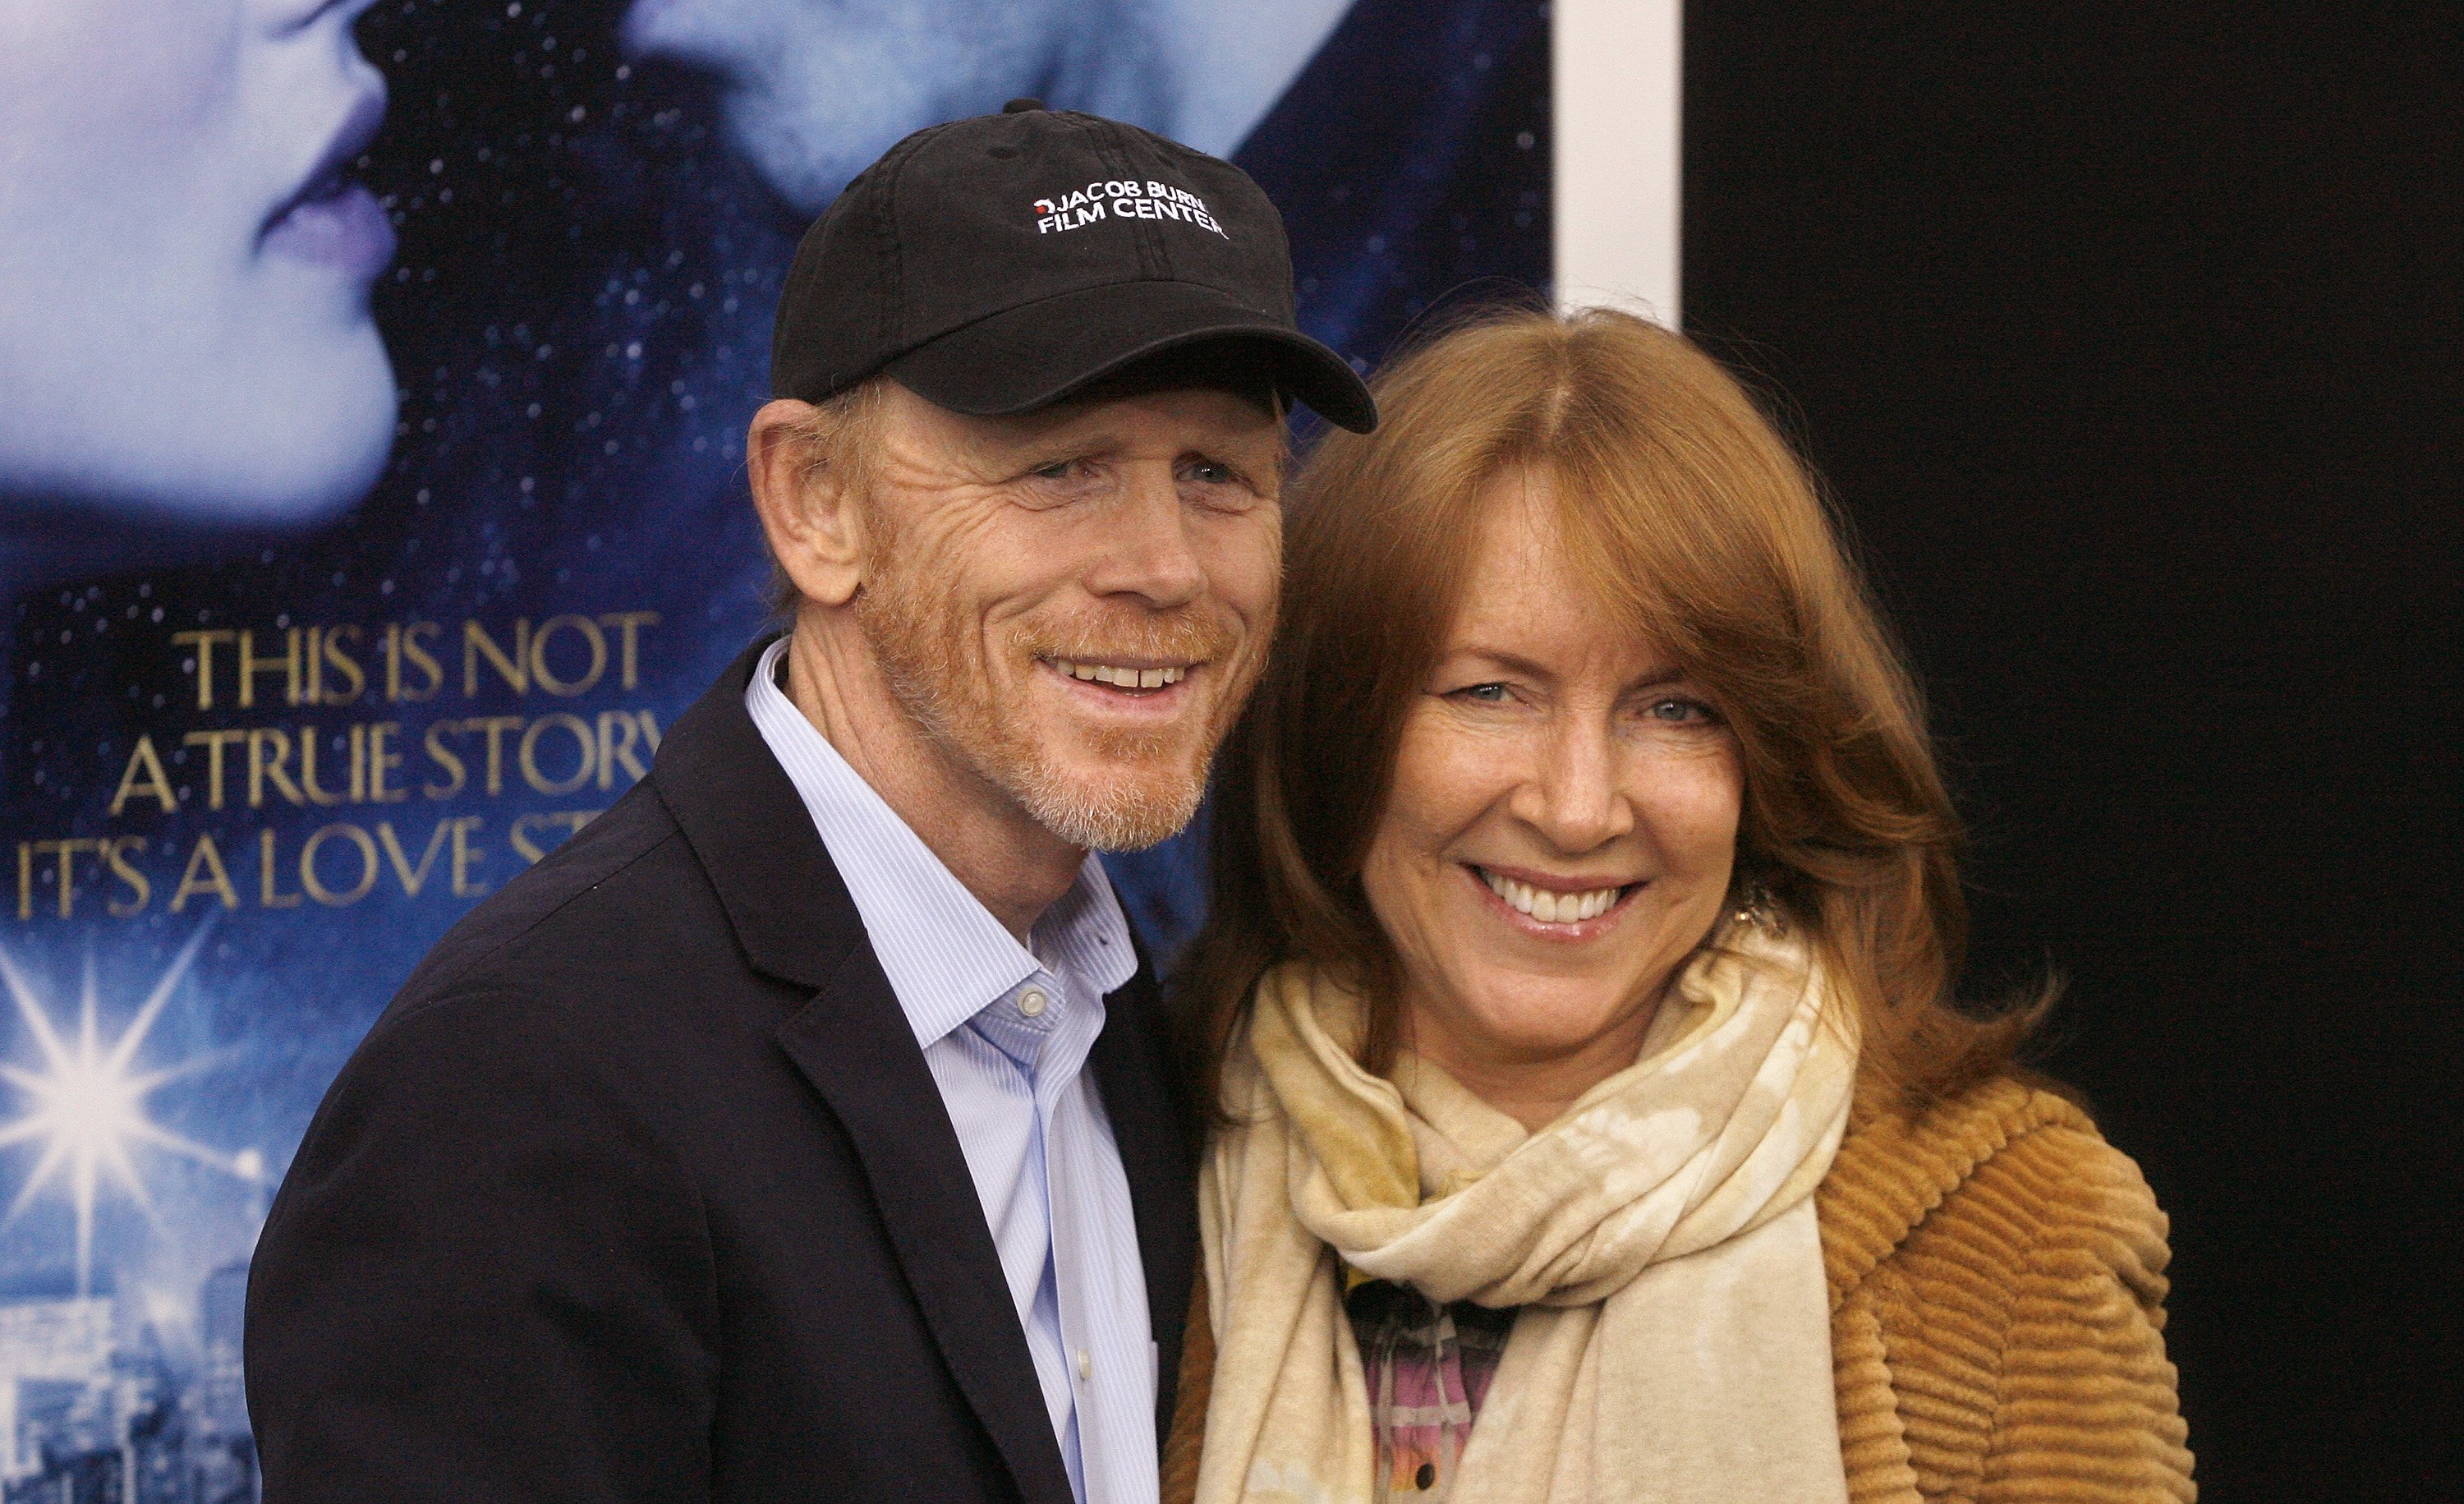 Ron Howard and his wife Cheryl Howard in New York in 2014. |  Source: Getty Images 